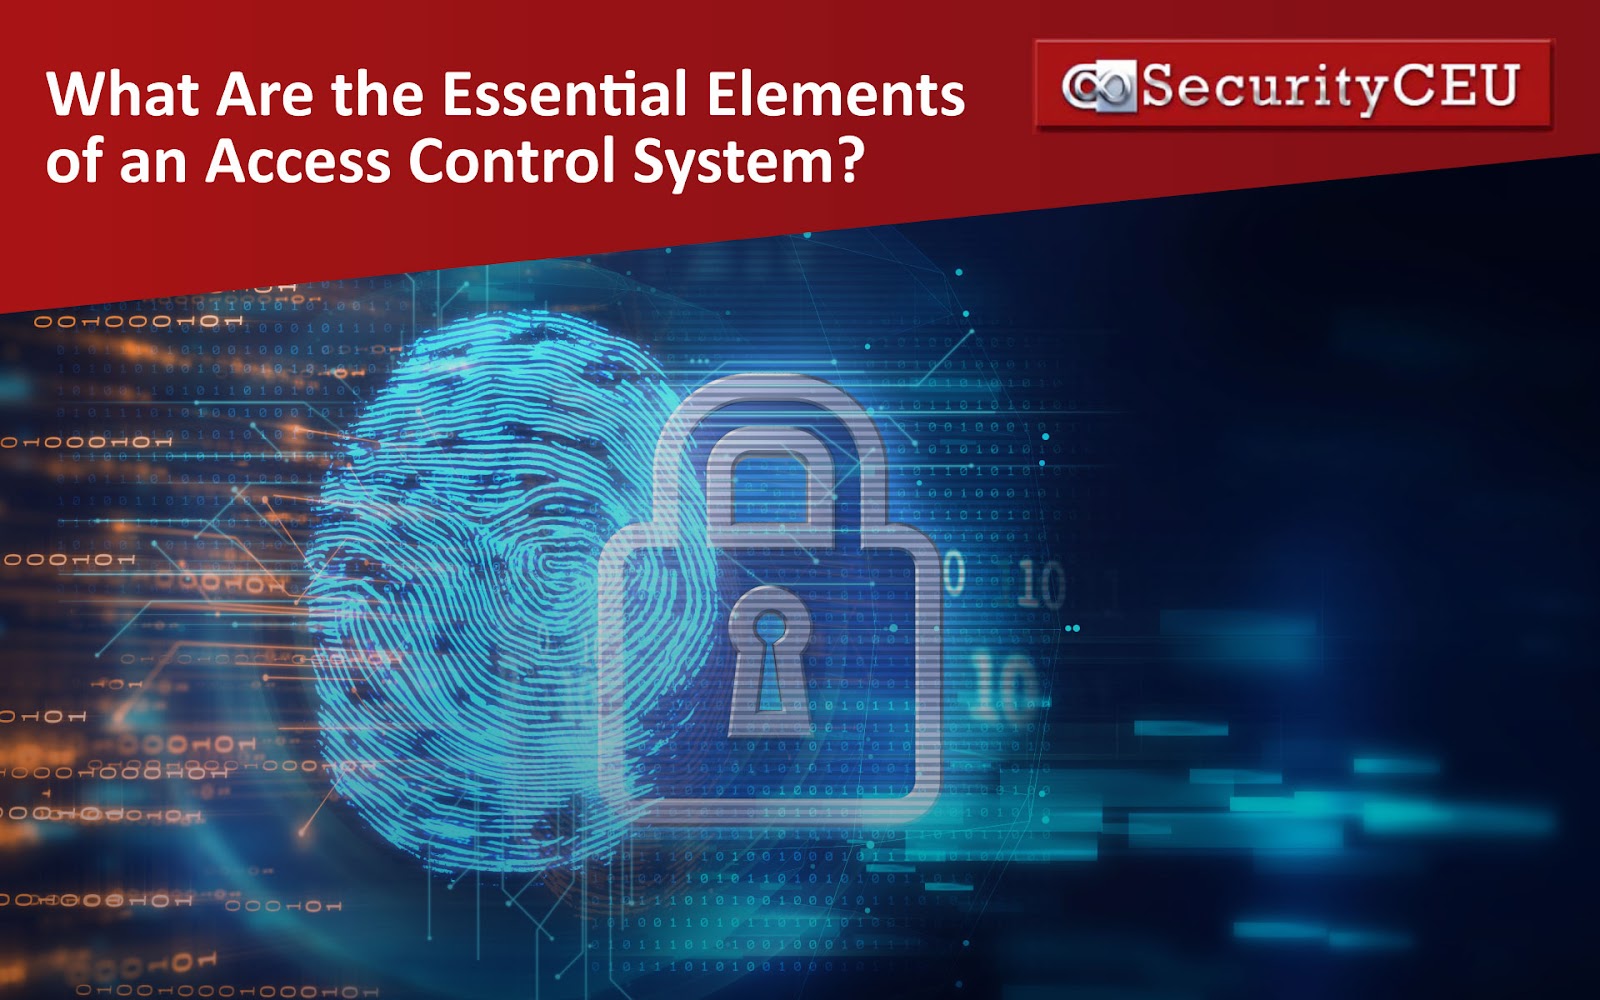 What Are the Essential Elements of an Access Control System?